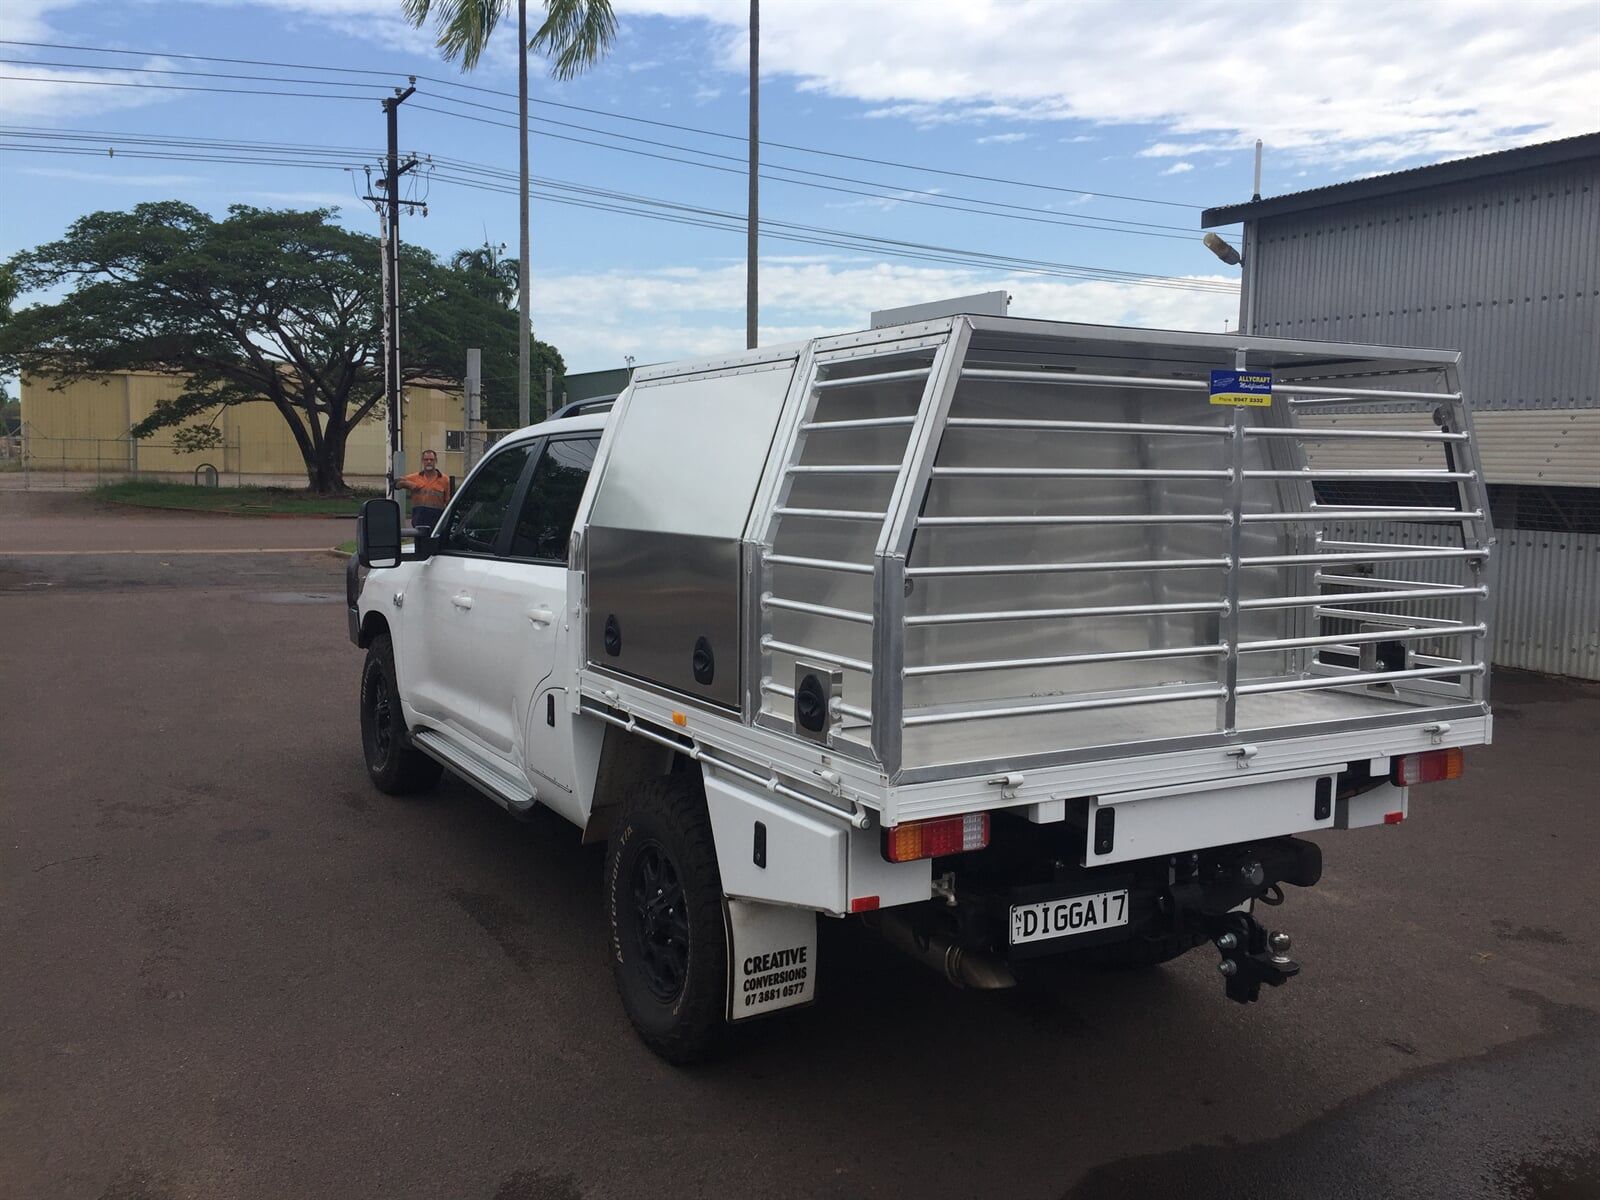 Custom hilux — Allycraft Modifications Aluminum Welding Fabrication Canopy in Winellie, NT